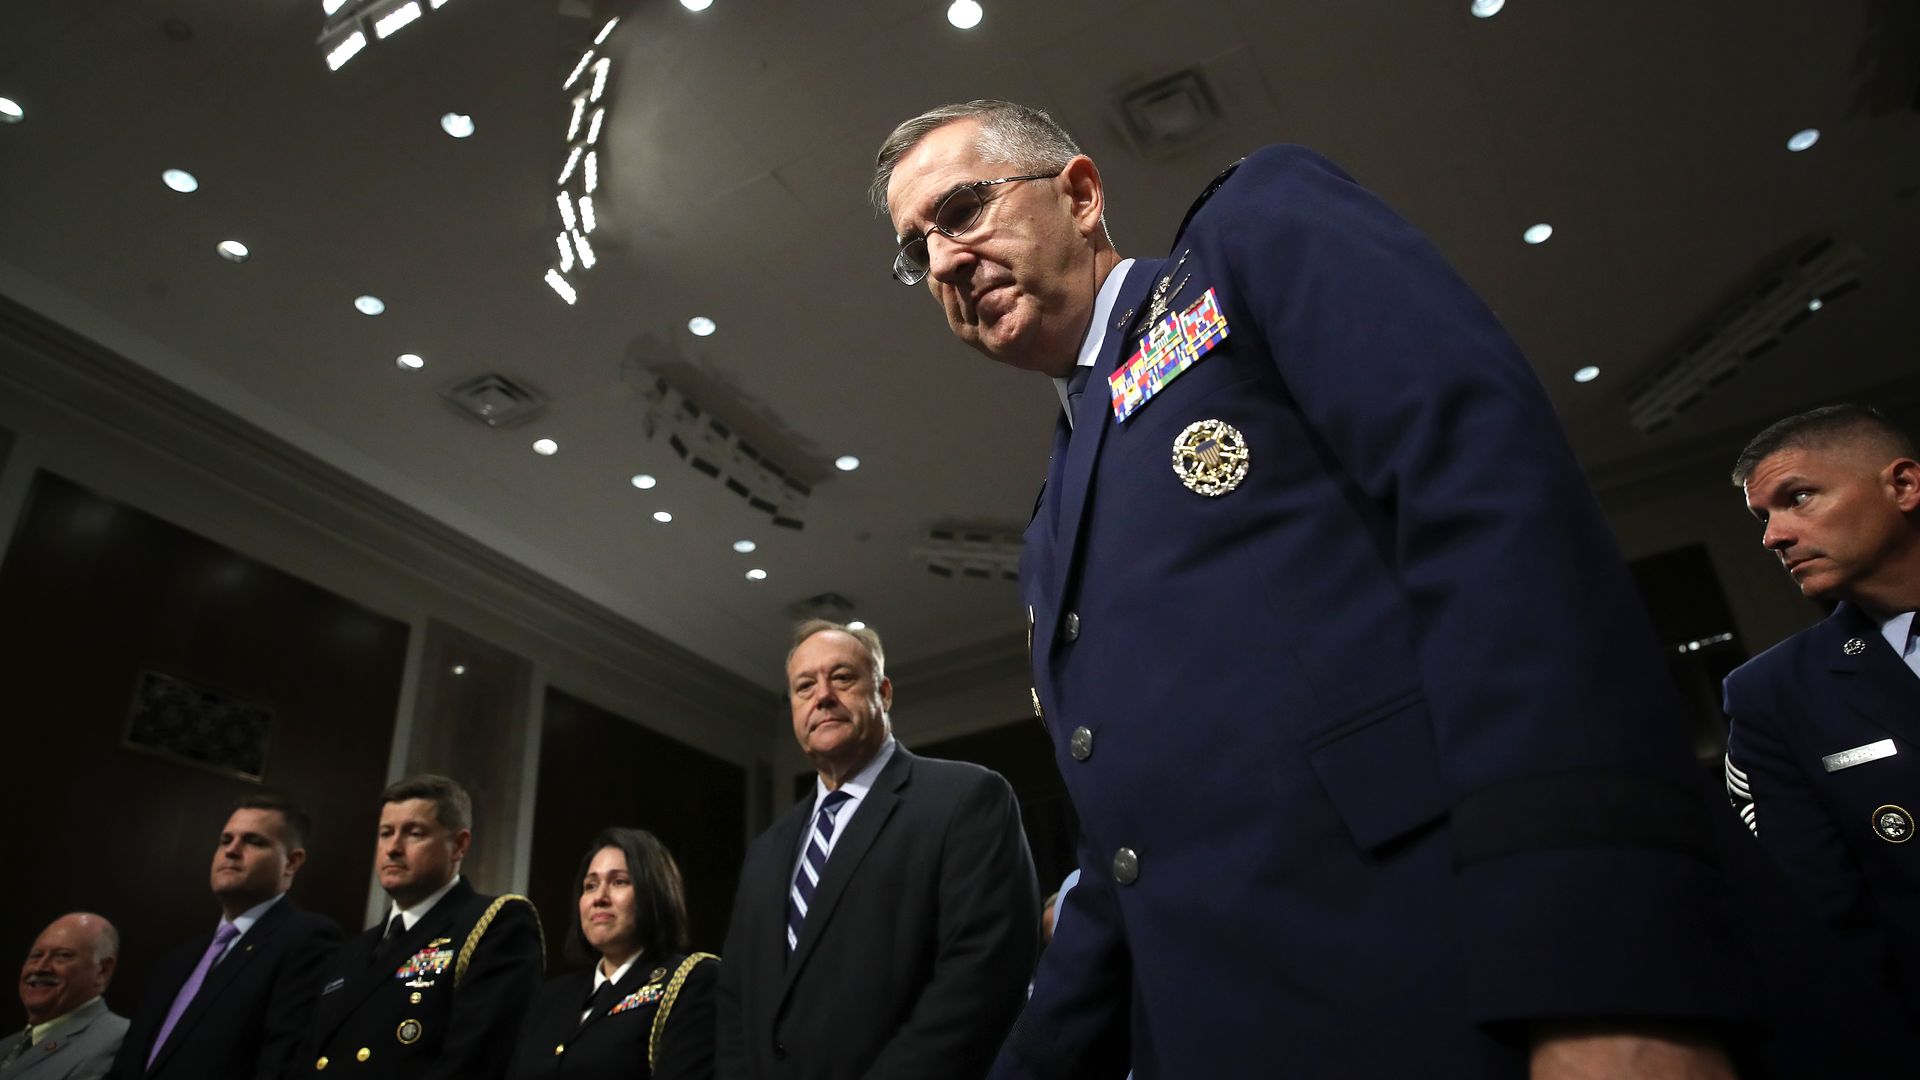 Photo of John Hyten in his military uniform as he arrives for a hearing before the Senate Armed Services Committee